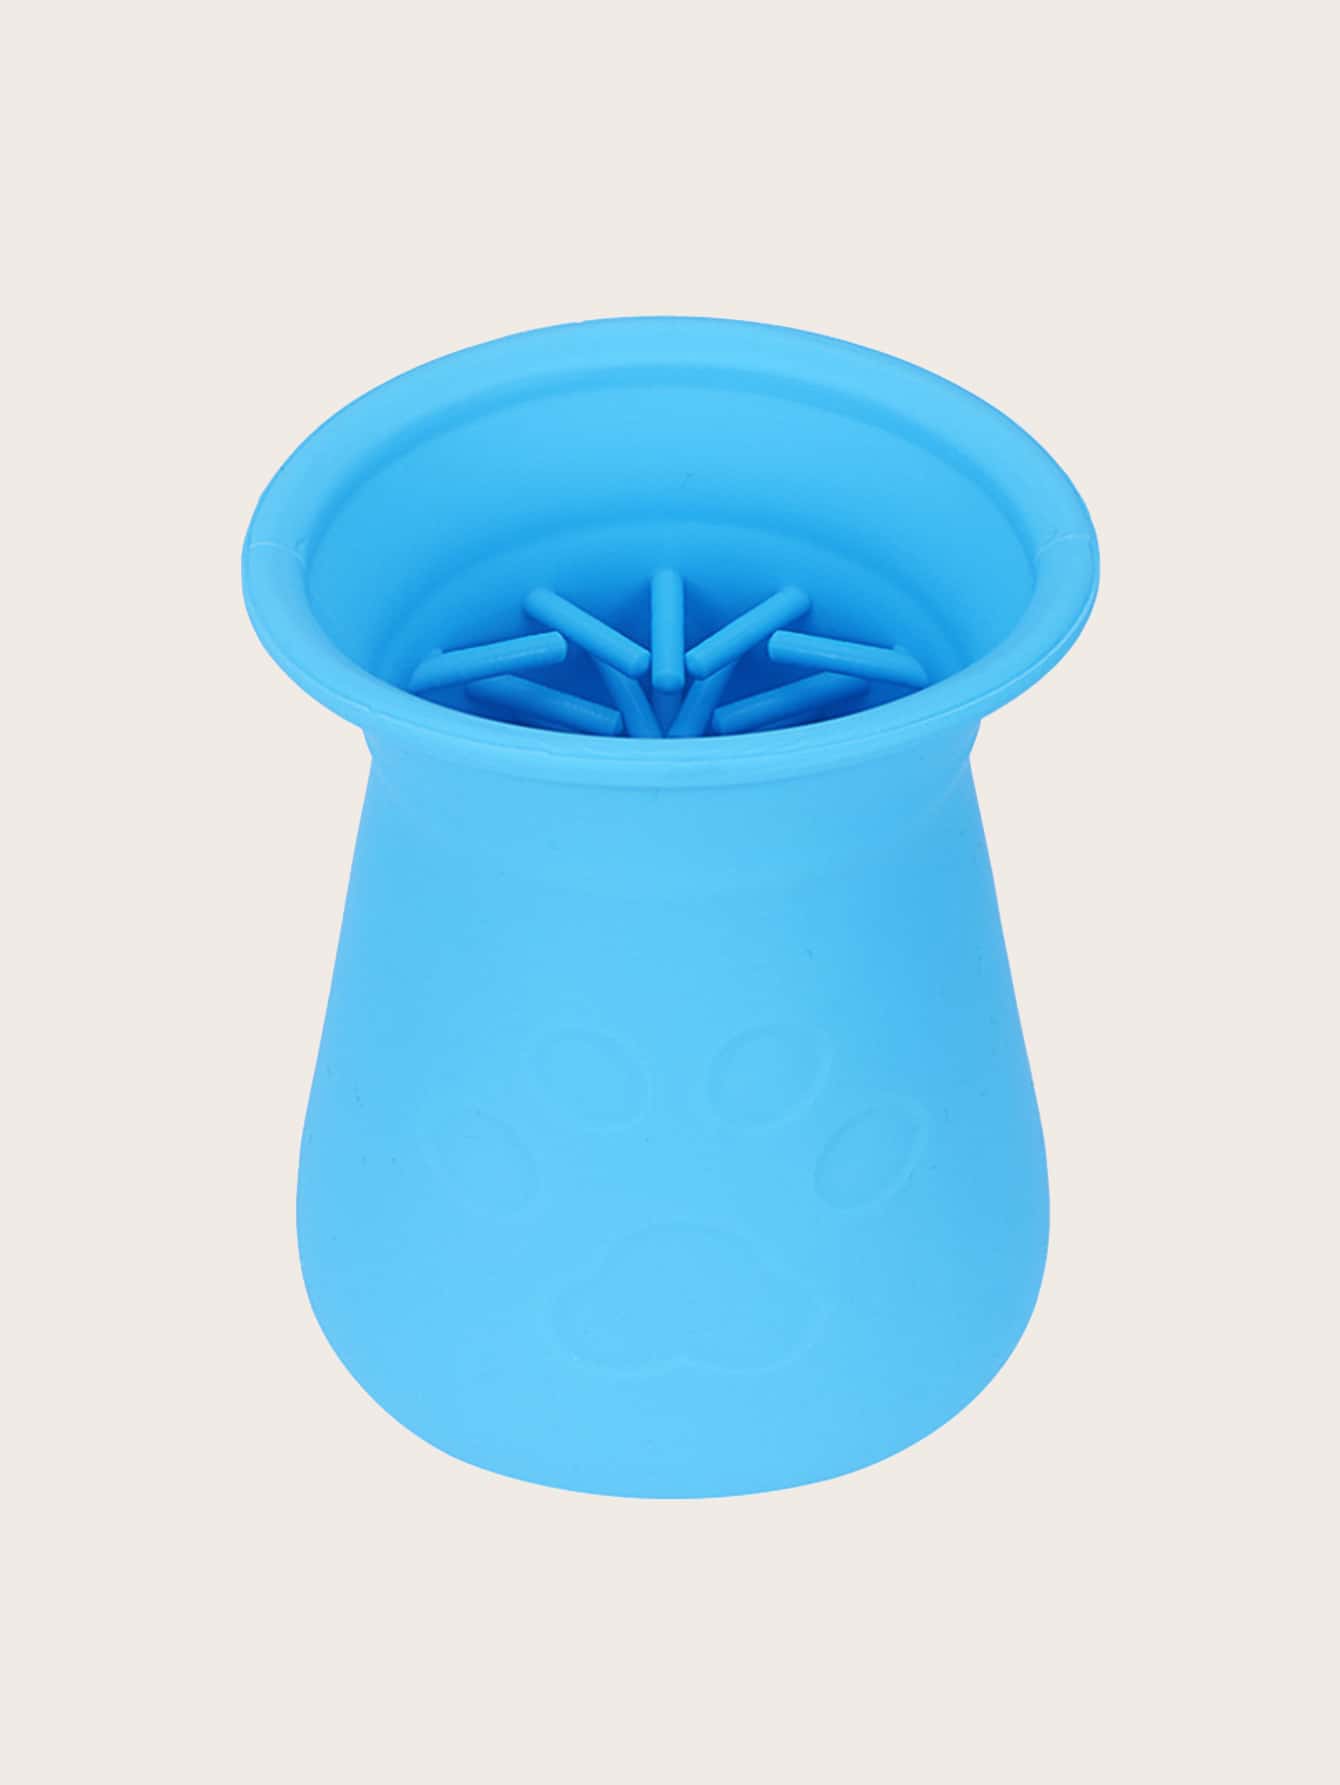 1pc Pet Foot Washing Cup